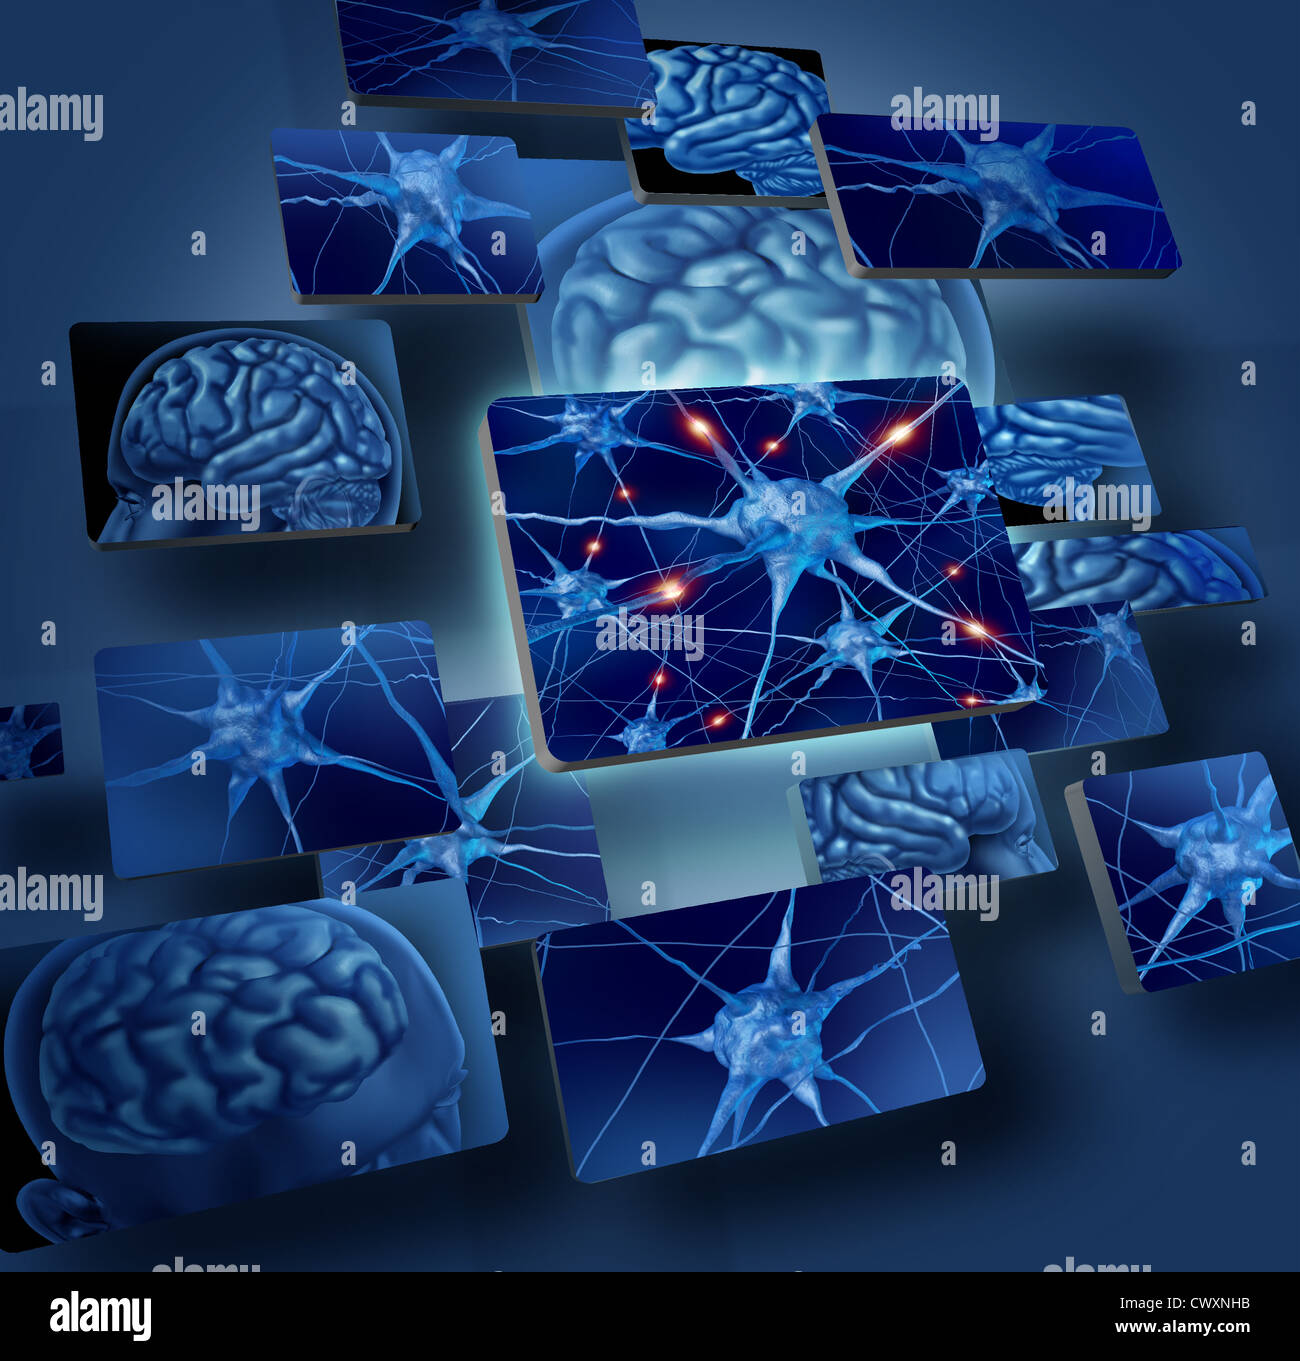 Brain neurons concepts as human brain medical symbol represented by geometric windows close up of neurons and organ cell activity showing intelligence related to memory. Stock Photo